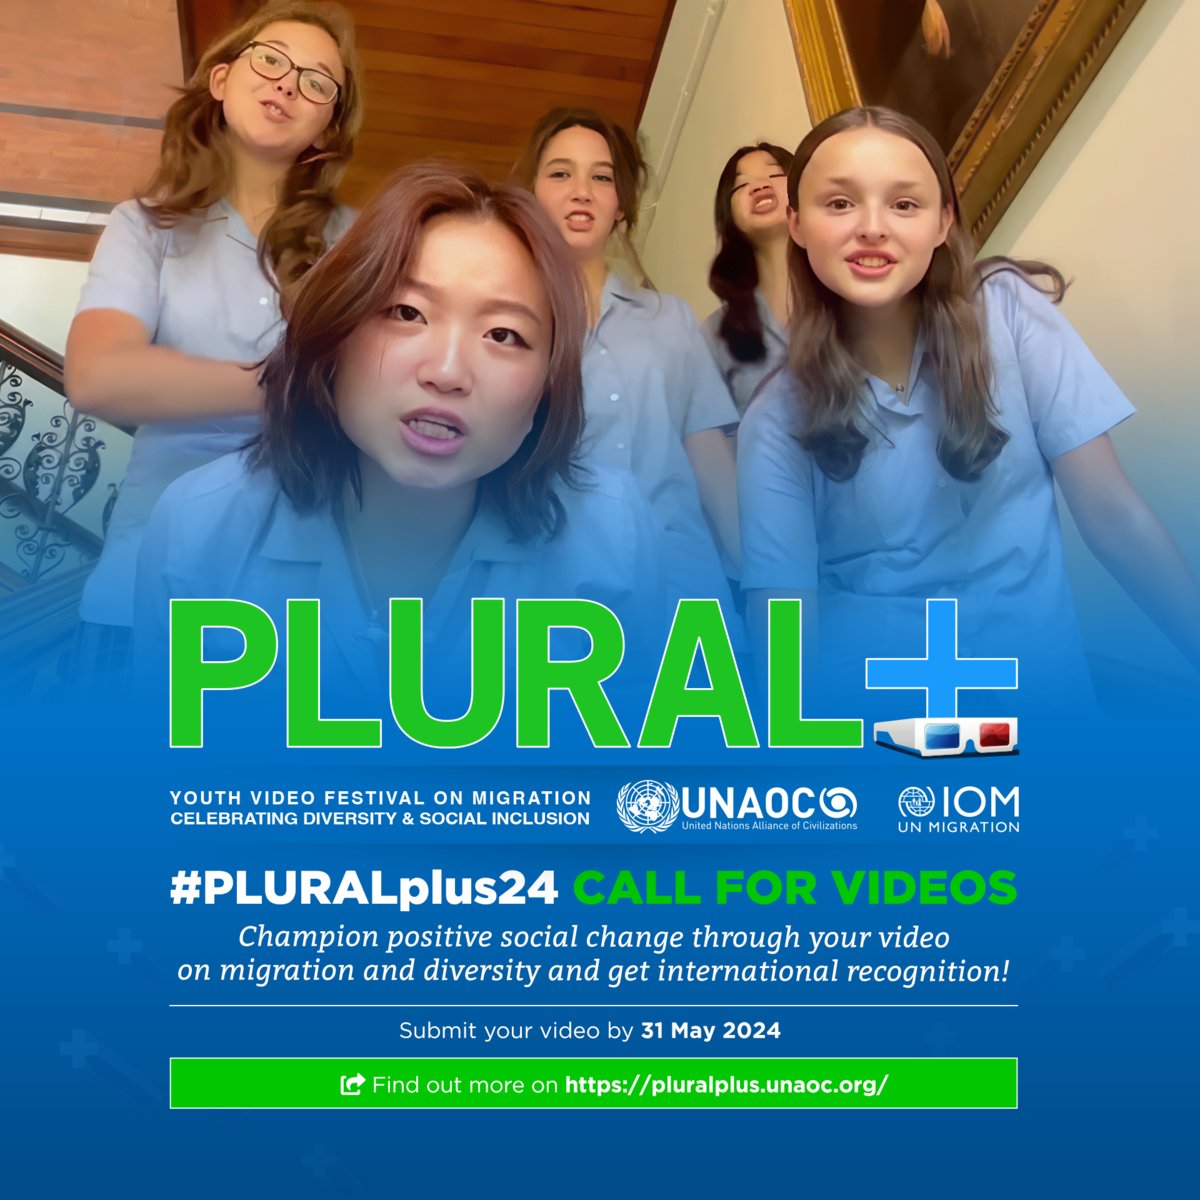 Calling all young filmmakers between the ages of 12 - 25! Submit your videos to the PLURAL+ Youth Video Festival and share your perspectives on migration, diversity, and inclusion. Let your voice be heard. Deadline: May 31, 2024. Visit pluralplus.unaoc.org. #PLURALplus24'